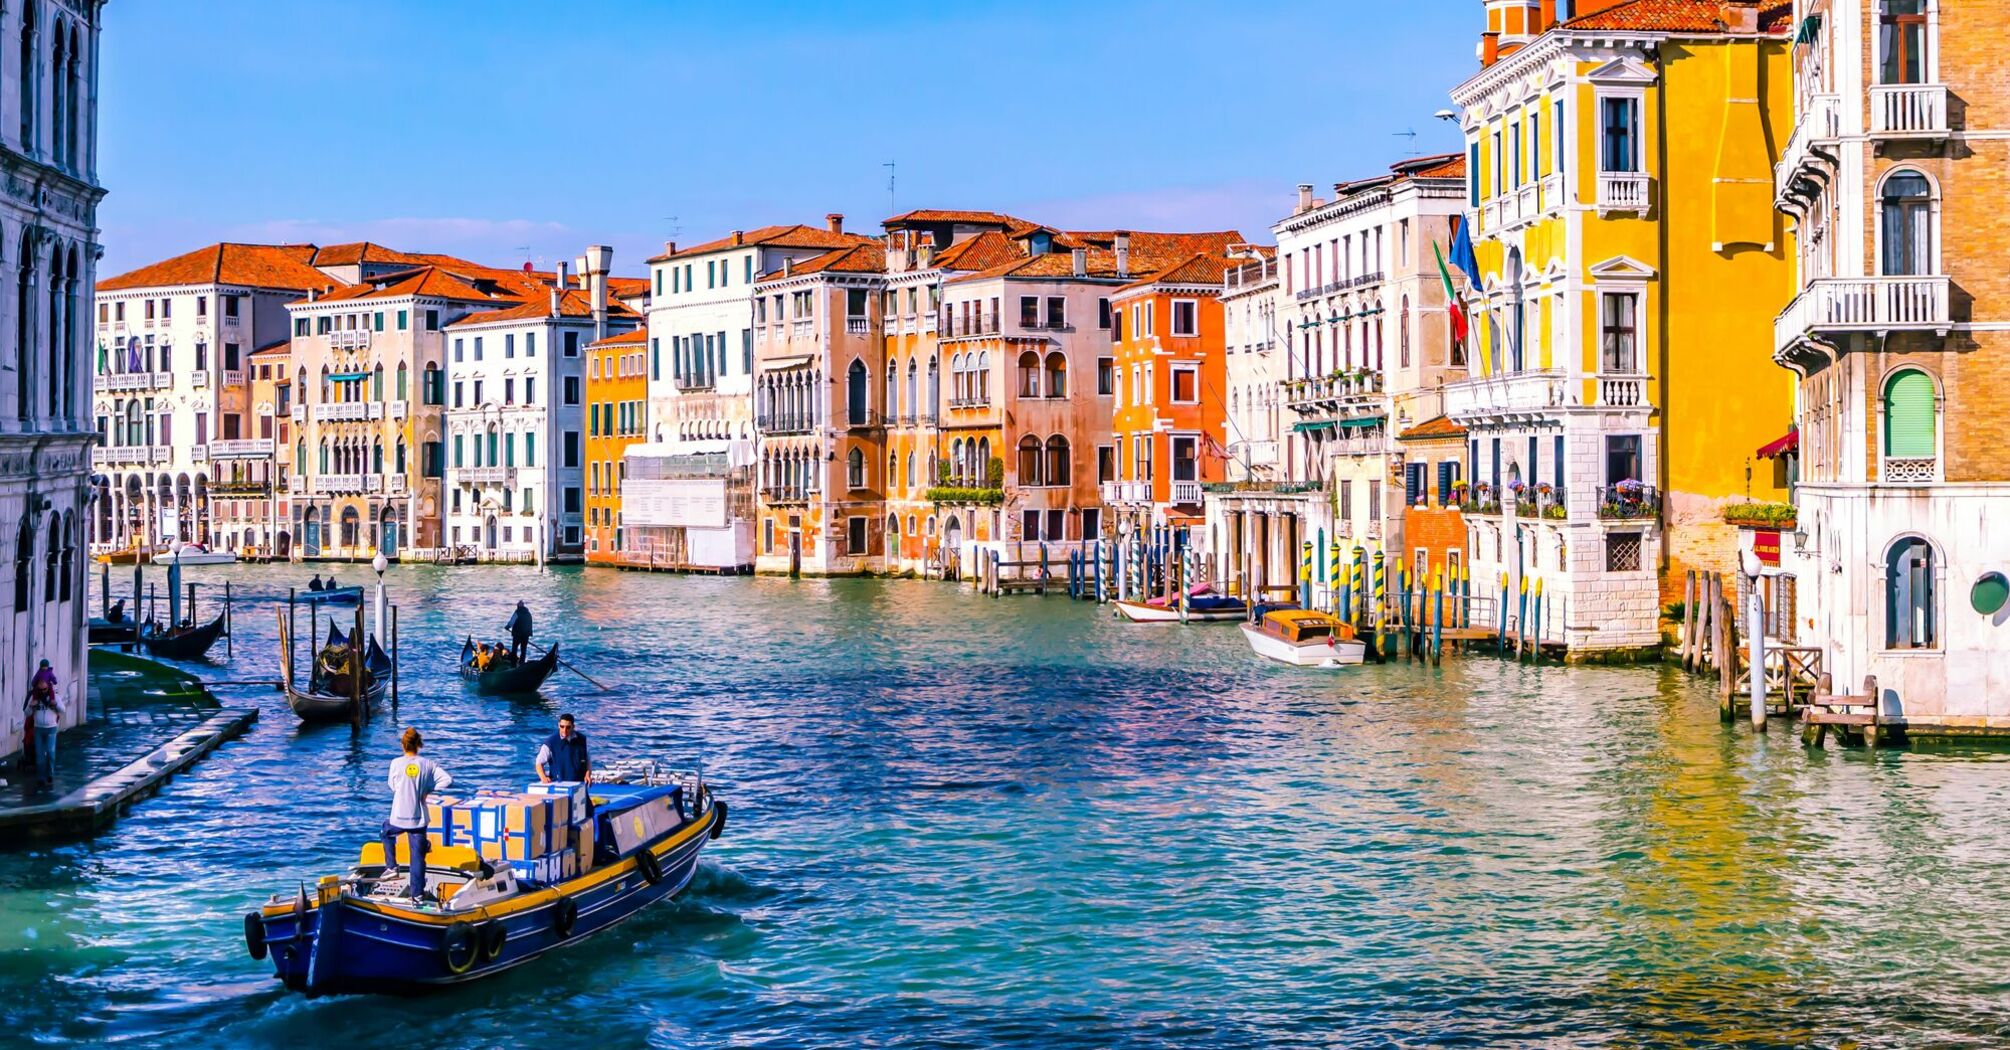 Grand Canal in Venice with colorful buildings on each side